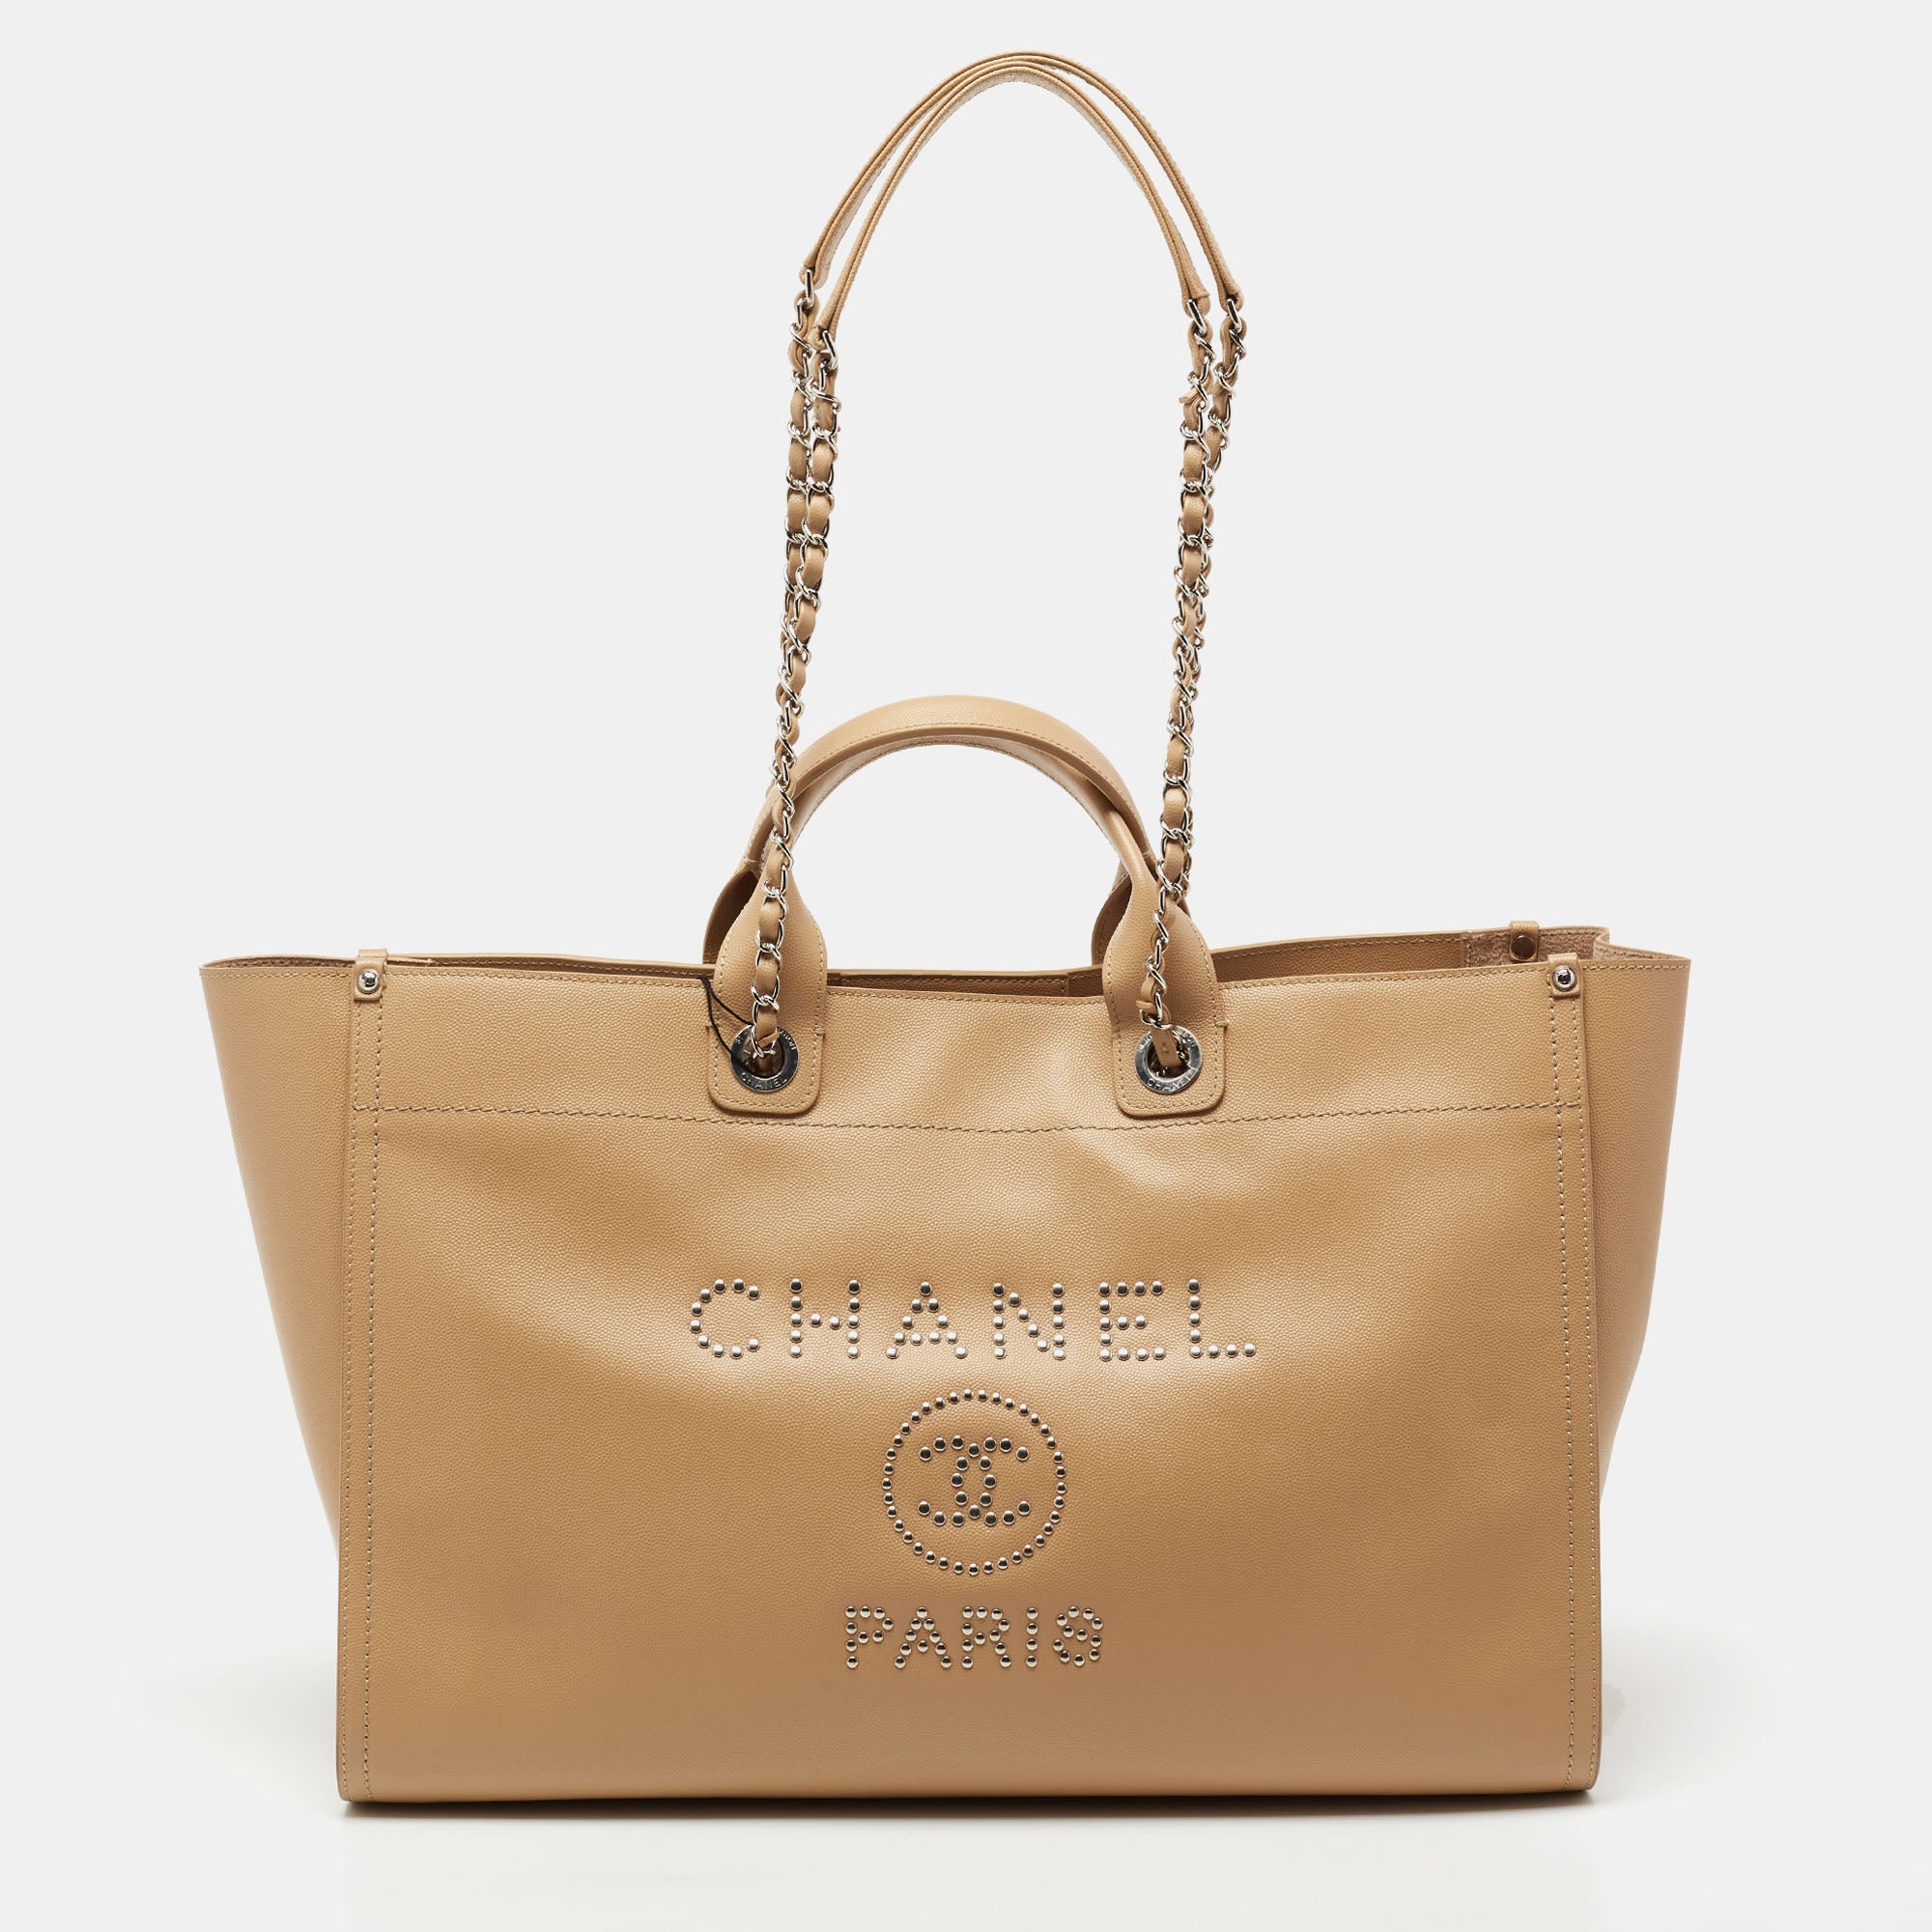 Chanel Beige Leather Large Studded Deauville Tote